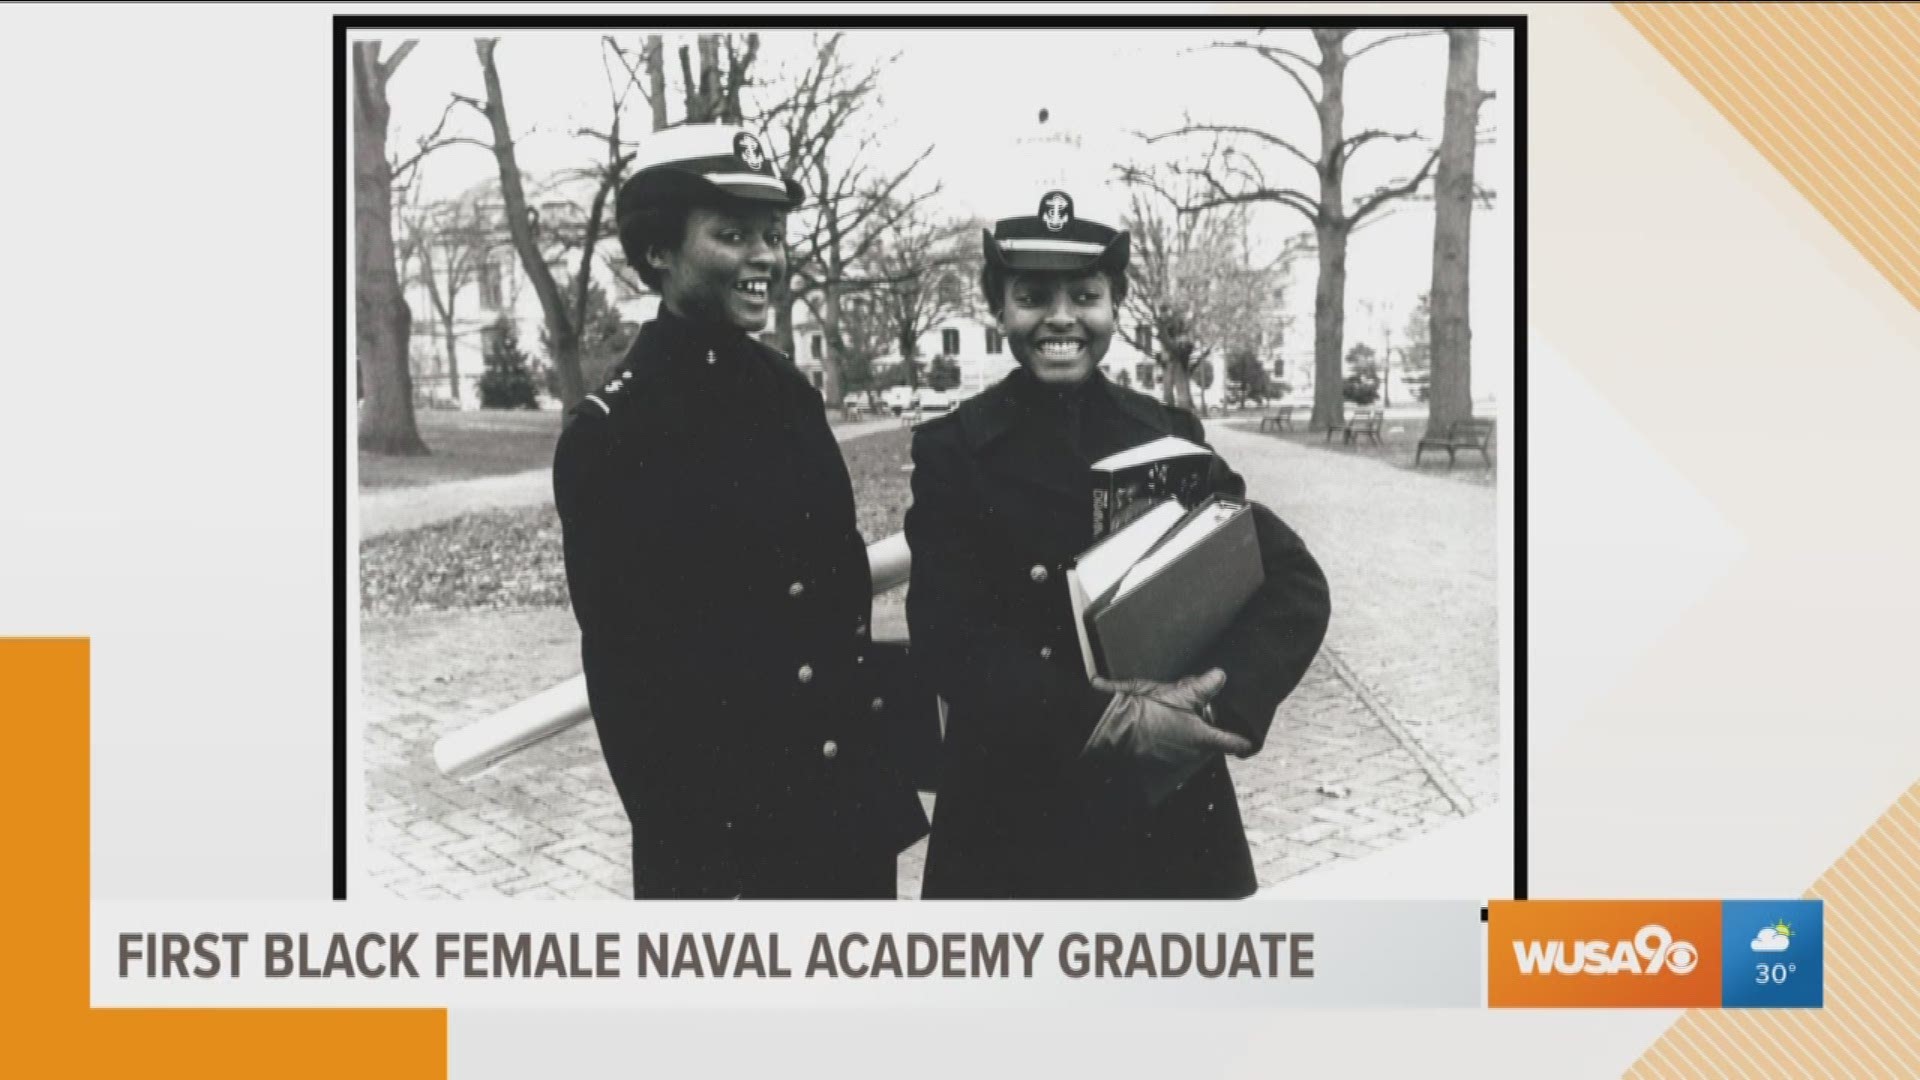 Janie Mines was in the first class of women to be admitted to the Naval Academy in 1976 - after 131 years of being an all-male institution. She was the first African American woman to graduate. She authored her experiences in her book 'No Coincidences.'